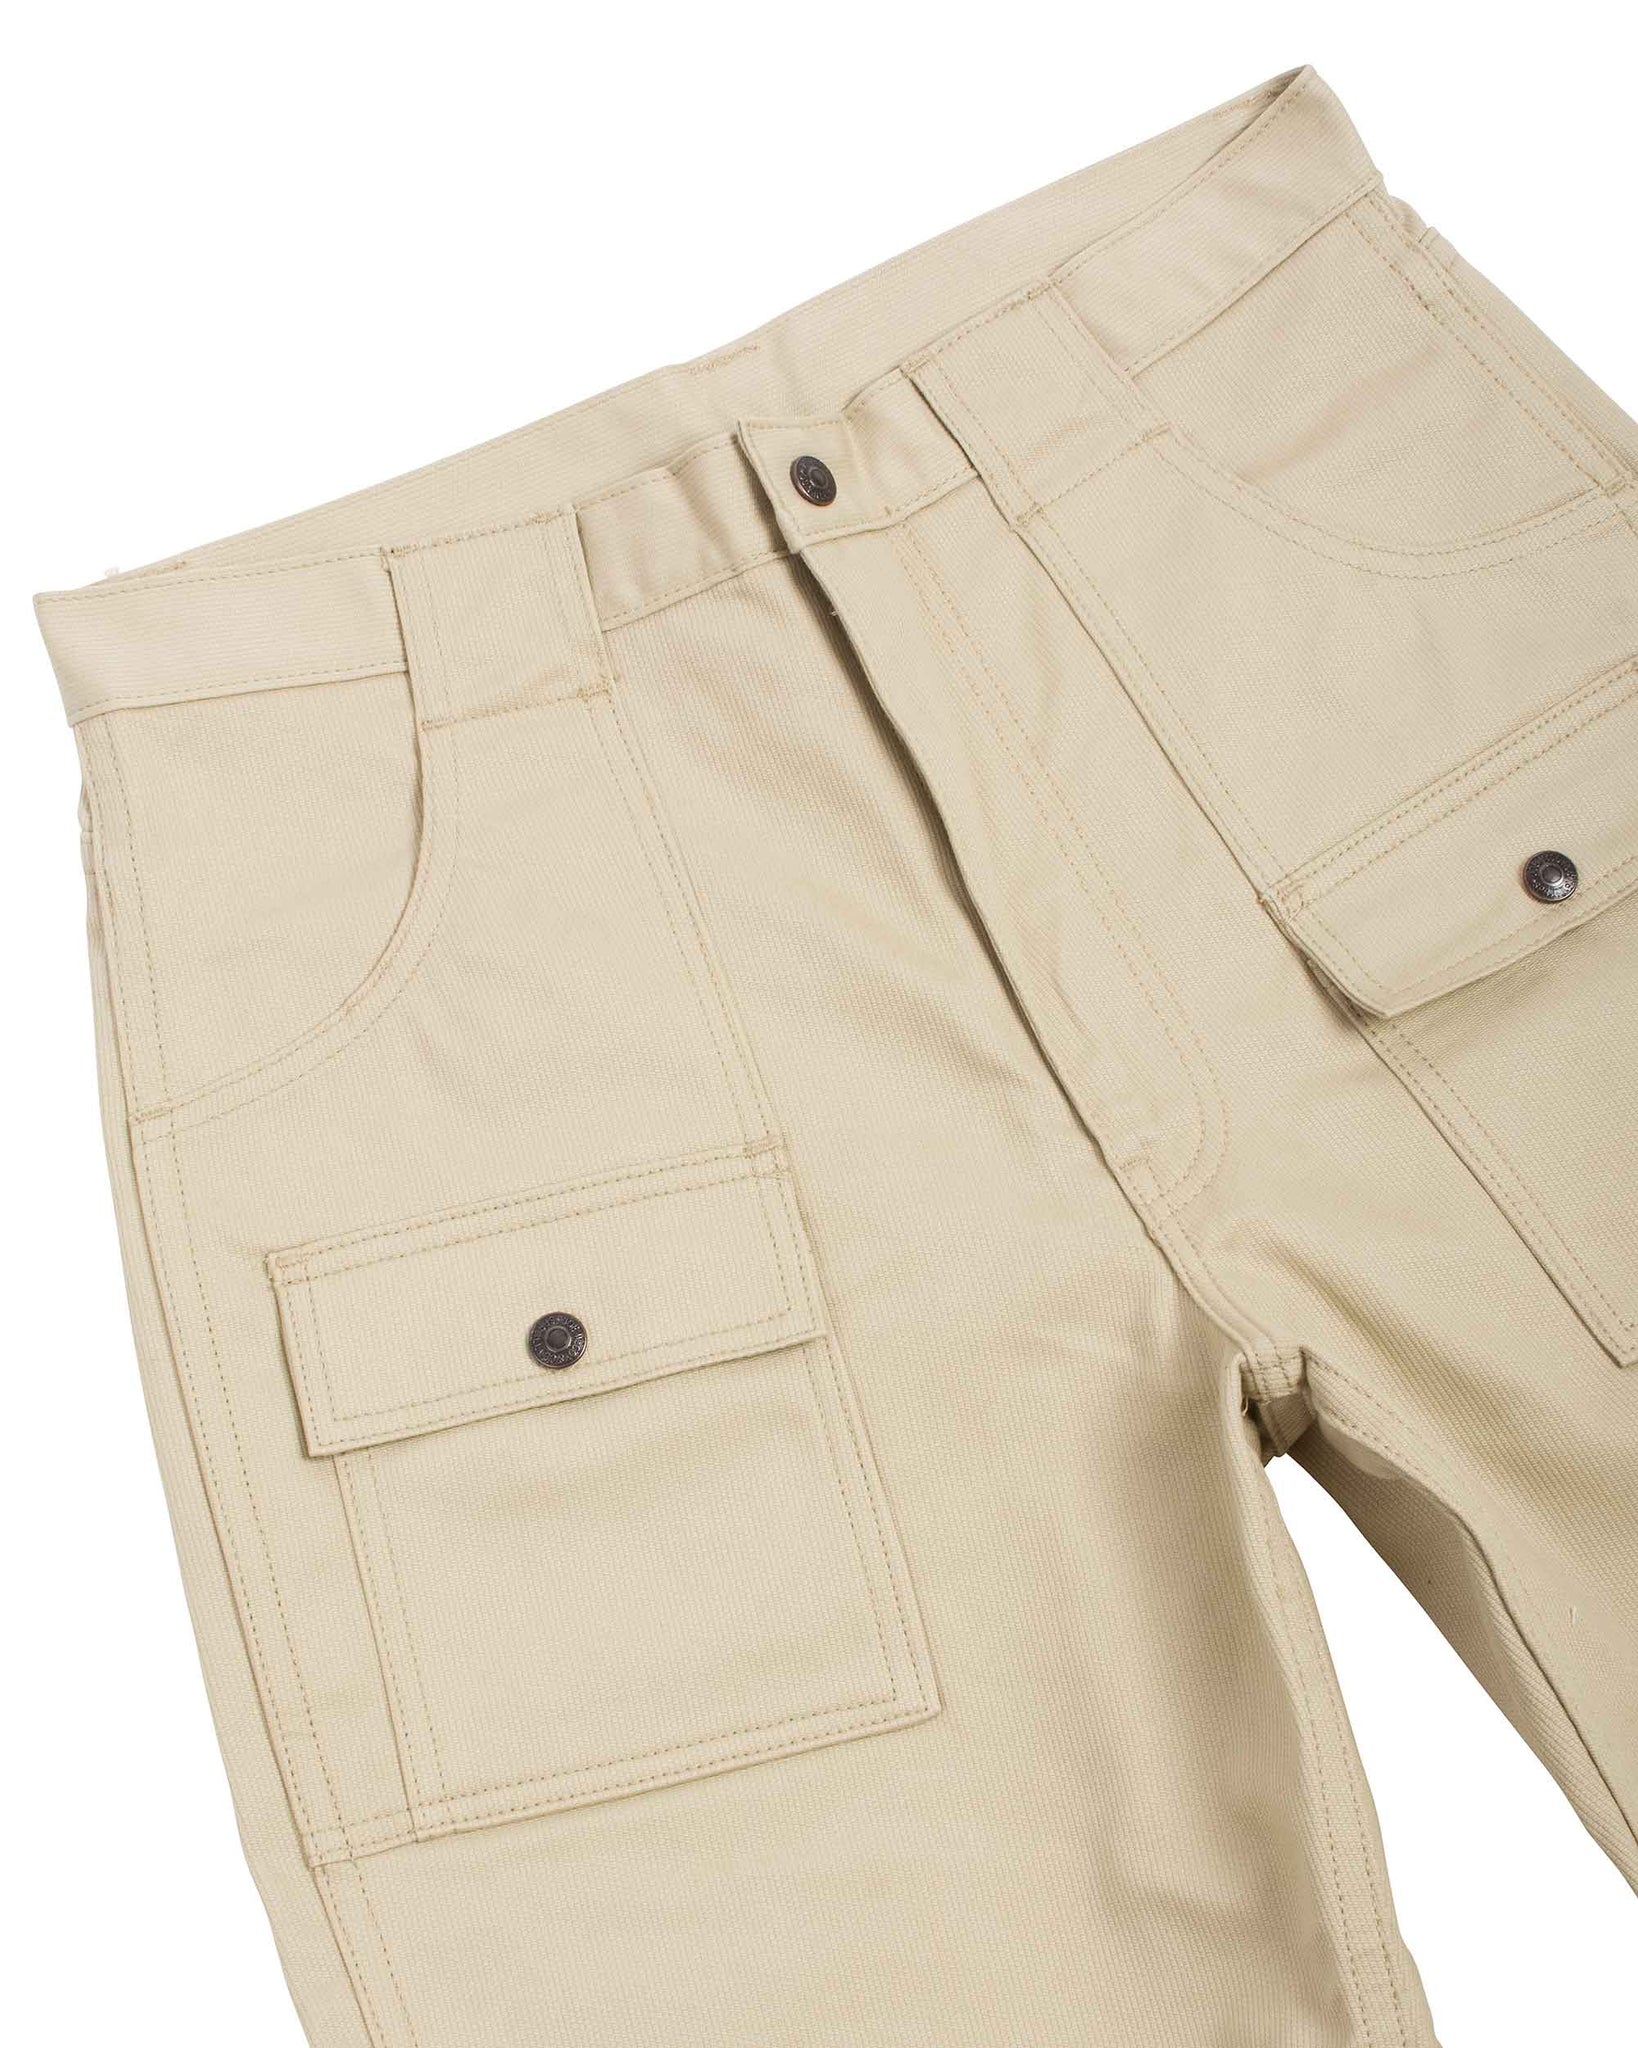 The Real McCoy's MP22013 Outdoor Utility Shorts / Pique Ivory Details